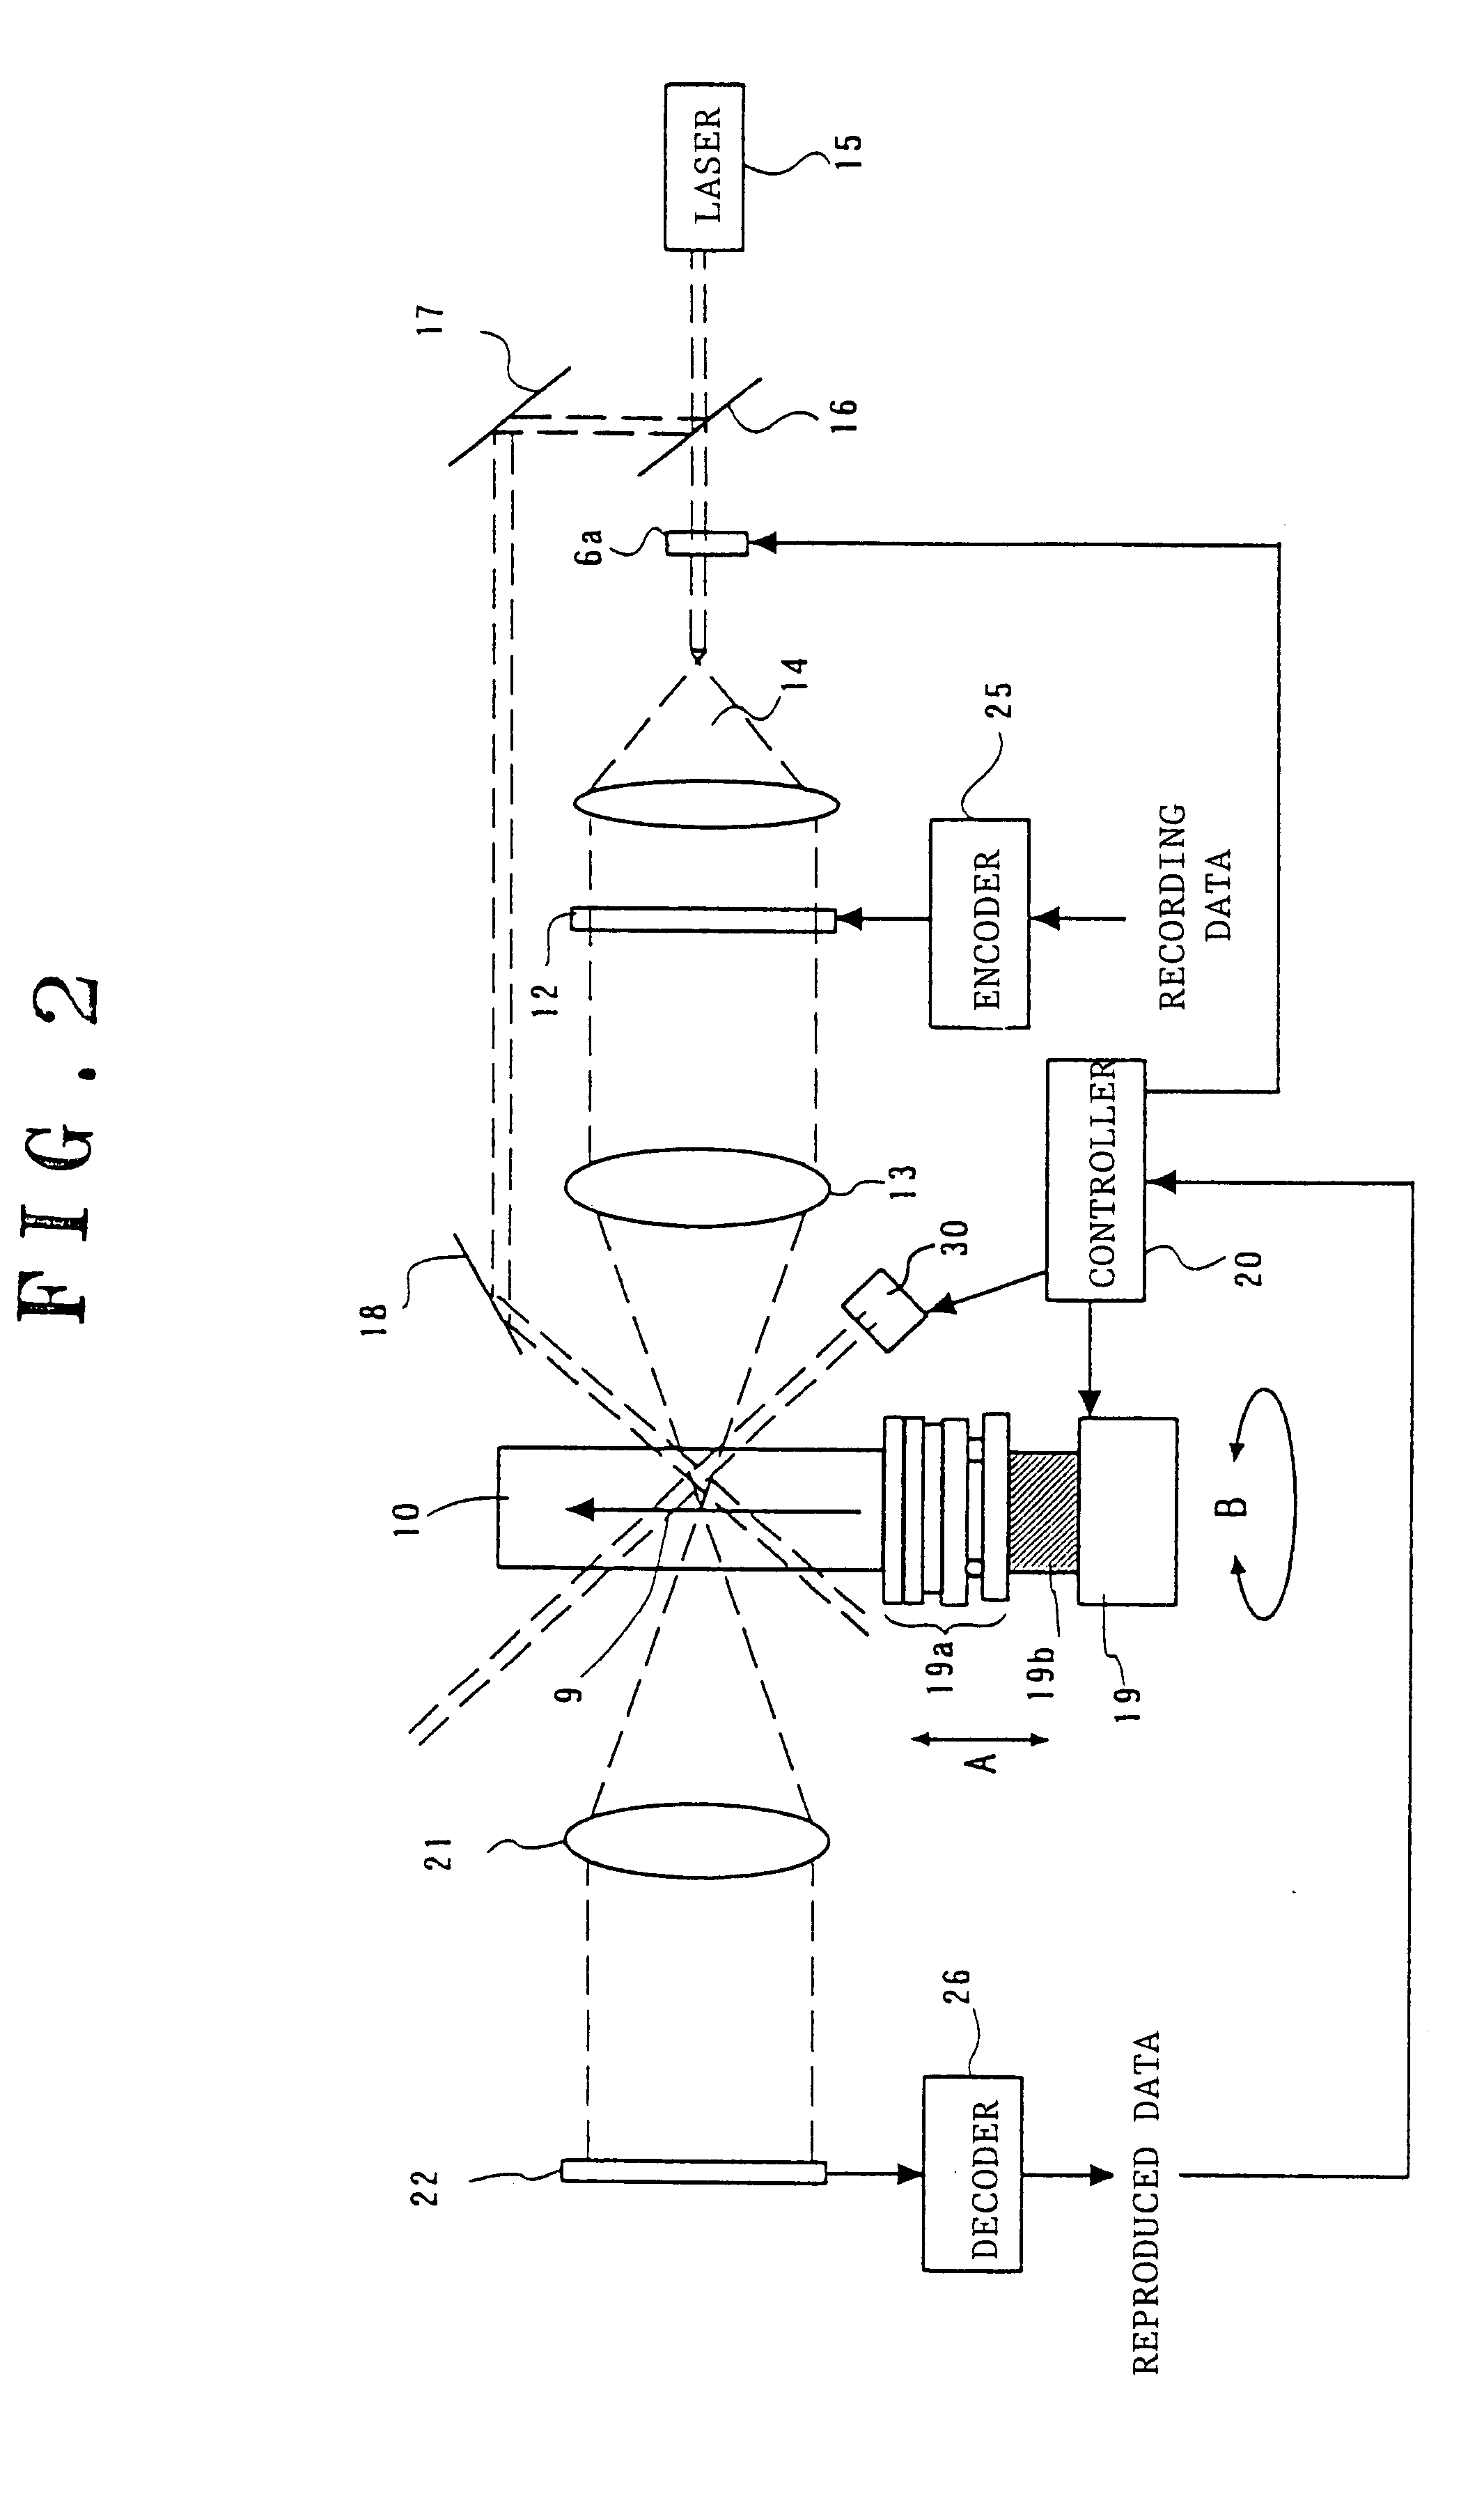 Optical information recording and reproducing apparatus having volume holographic memory